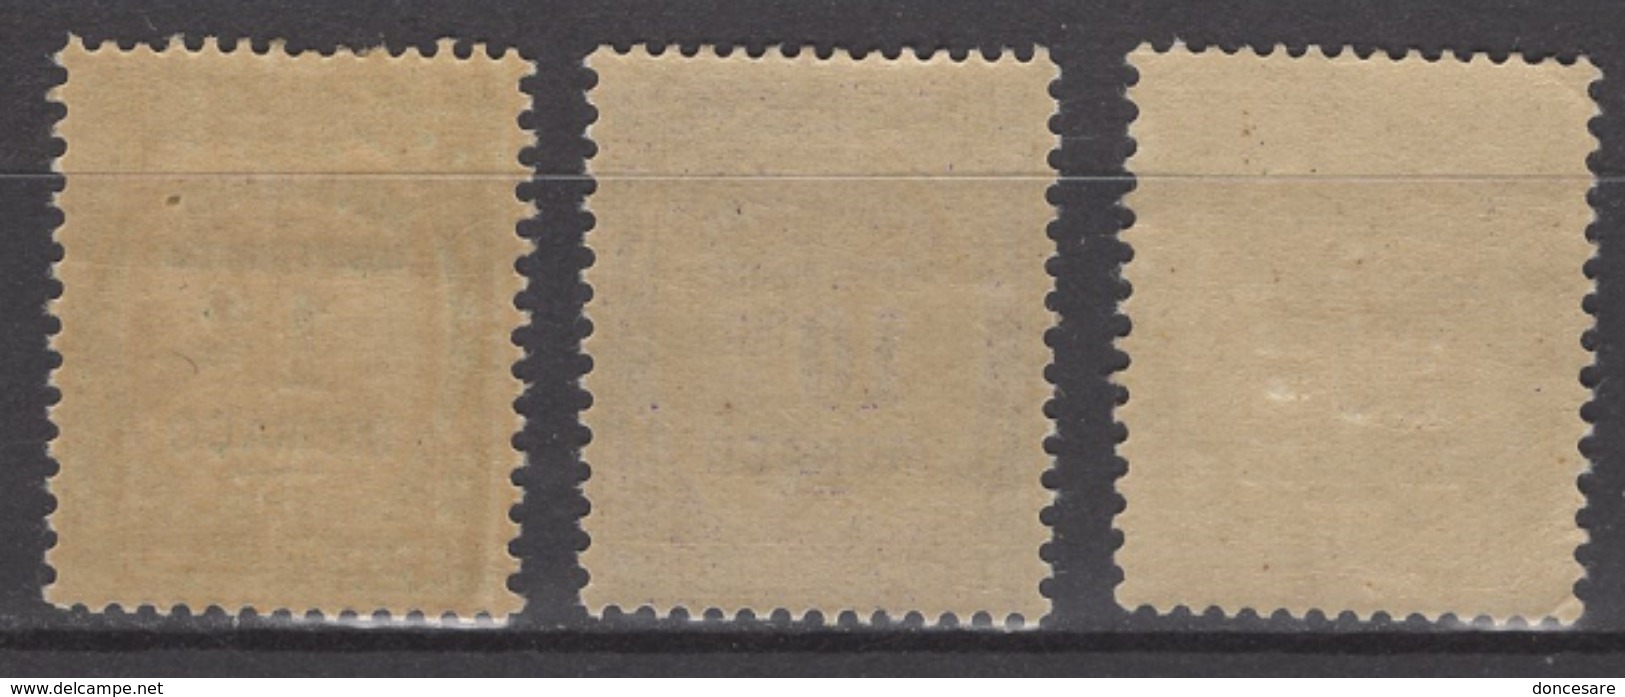 MONACO 1924 / 1932 LOT  N° 13 / 14 / 15 -  Timbres Taxe NEUFS**  /C2786 - Postage Due